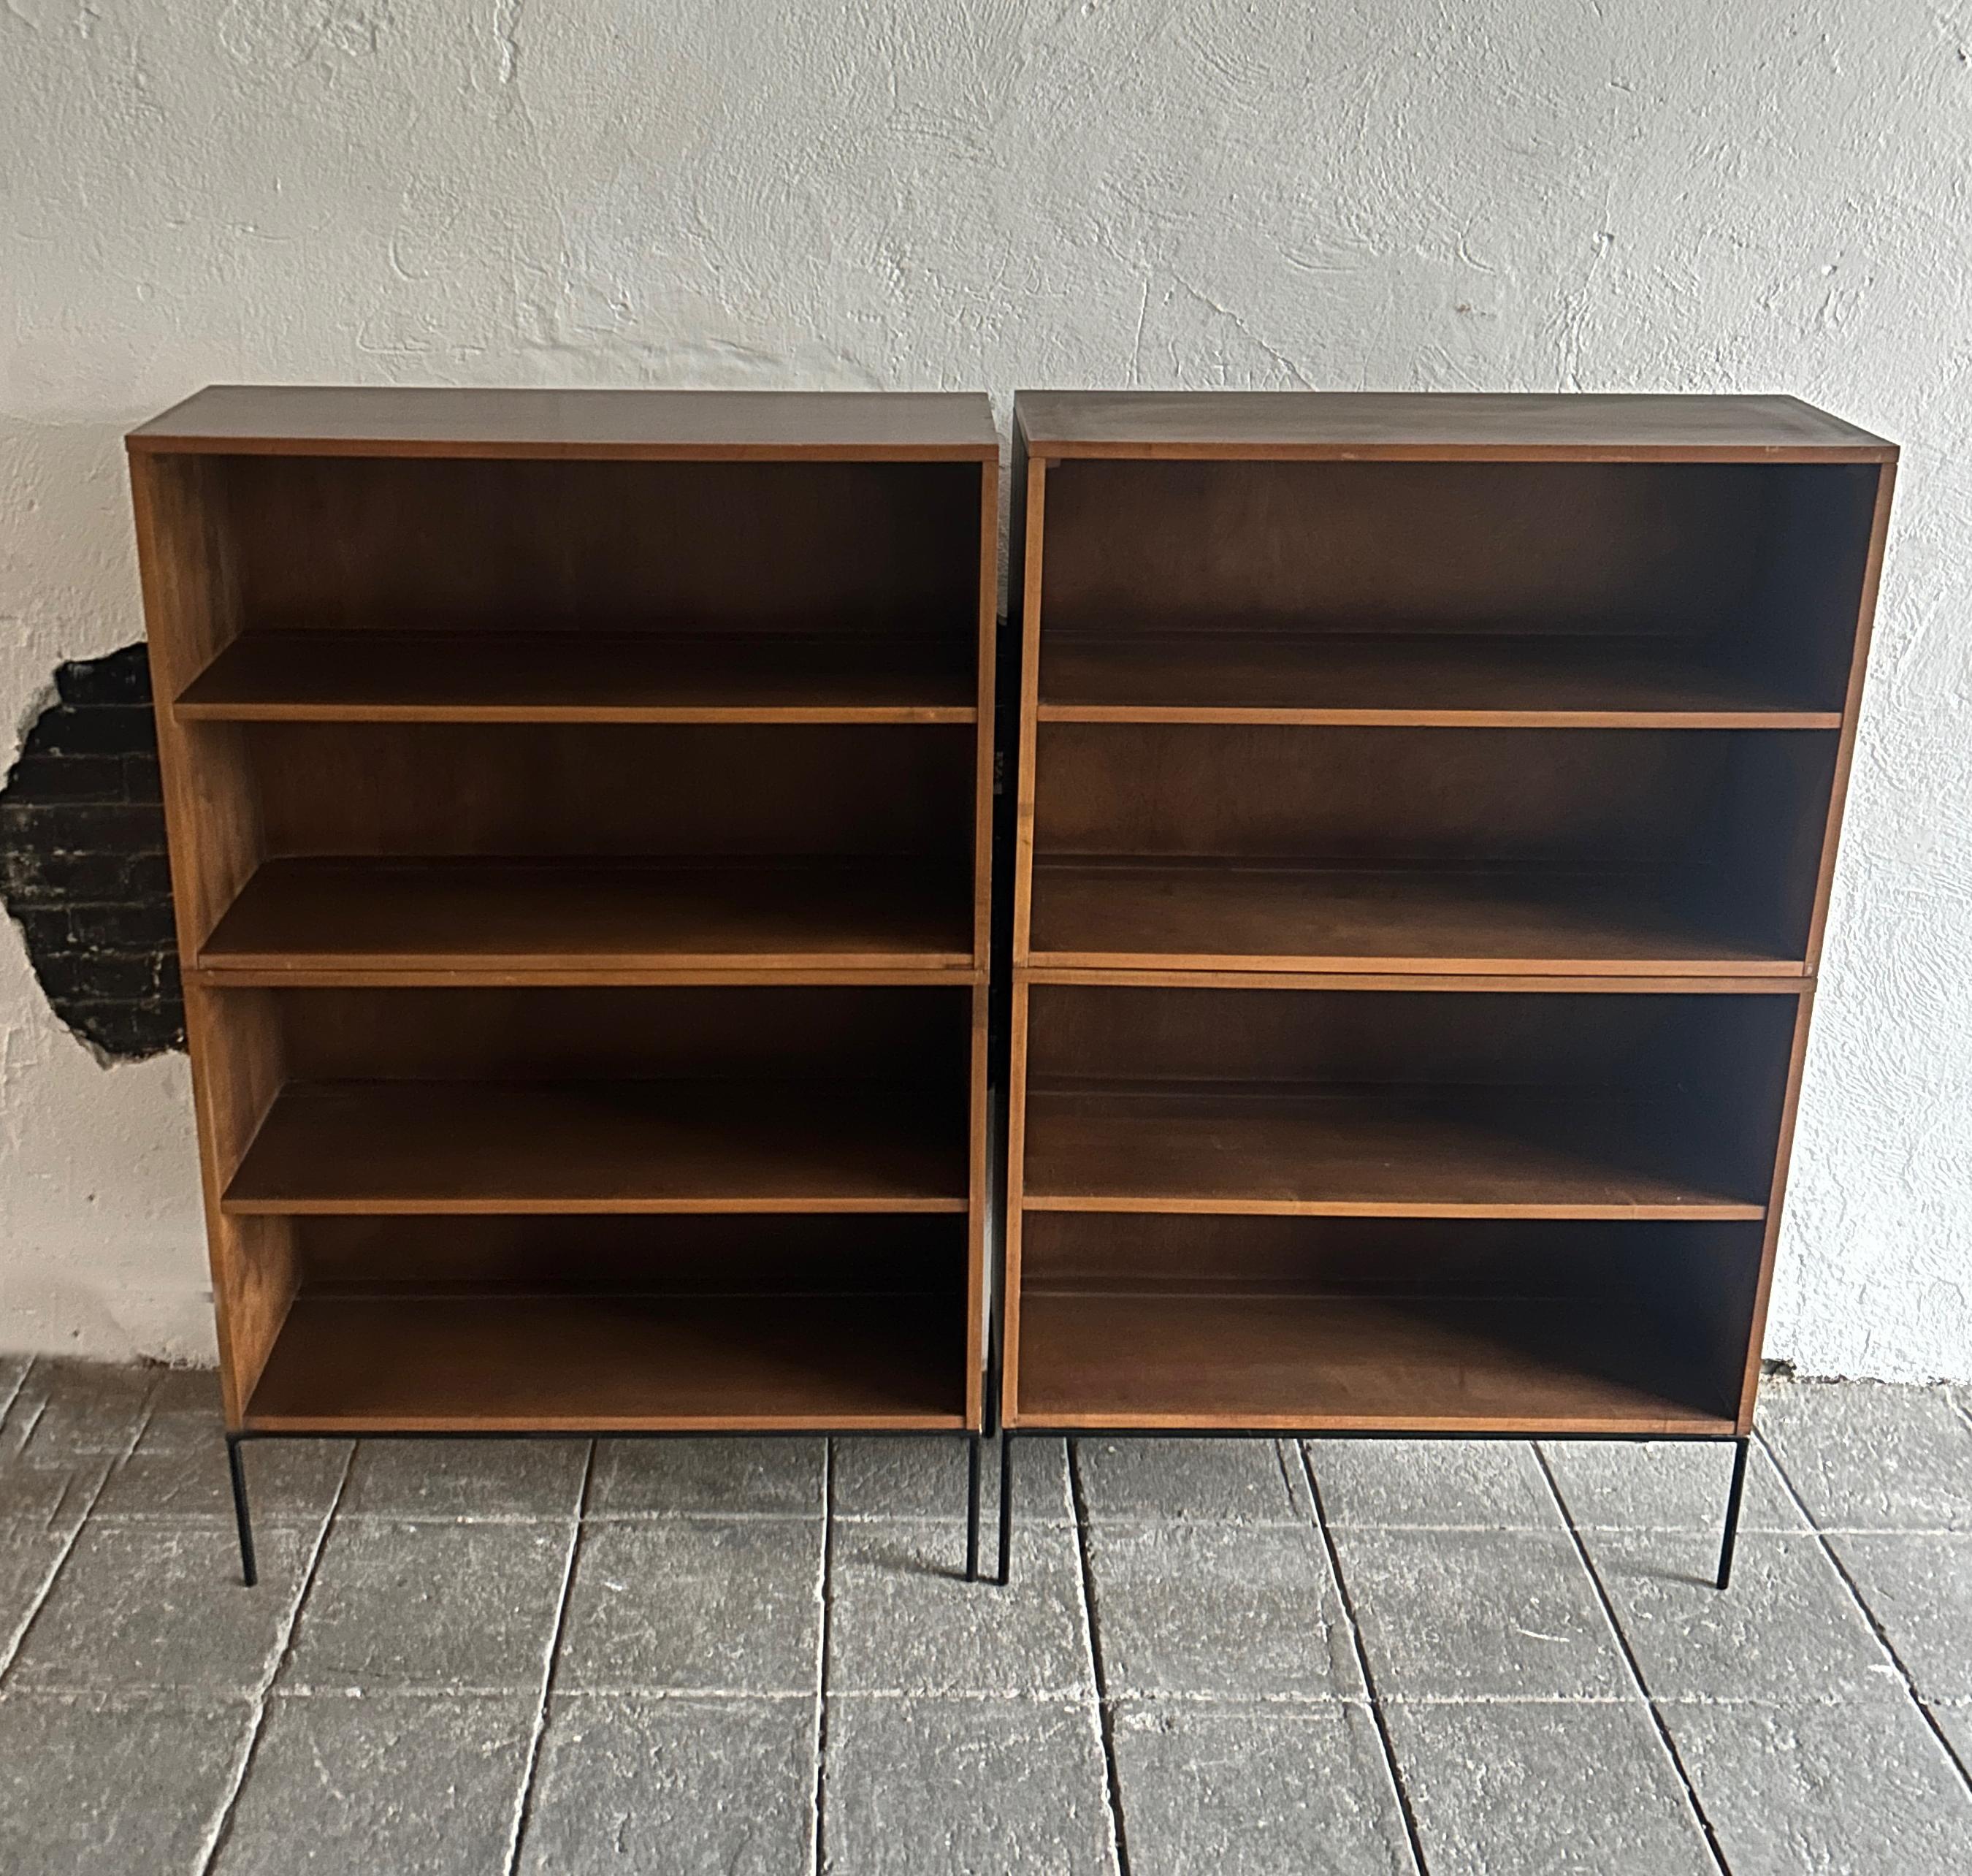 Pair of vintage midcentury Paul McCobb Double high bookcases bookshelves #1516 original walnut finish over solid maple with solid Iron 4 leg Iron base. Beautiful bookcase set by Paul McCobb, circa 1950s Planner Group, single center fixed shelf,